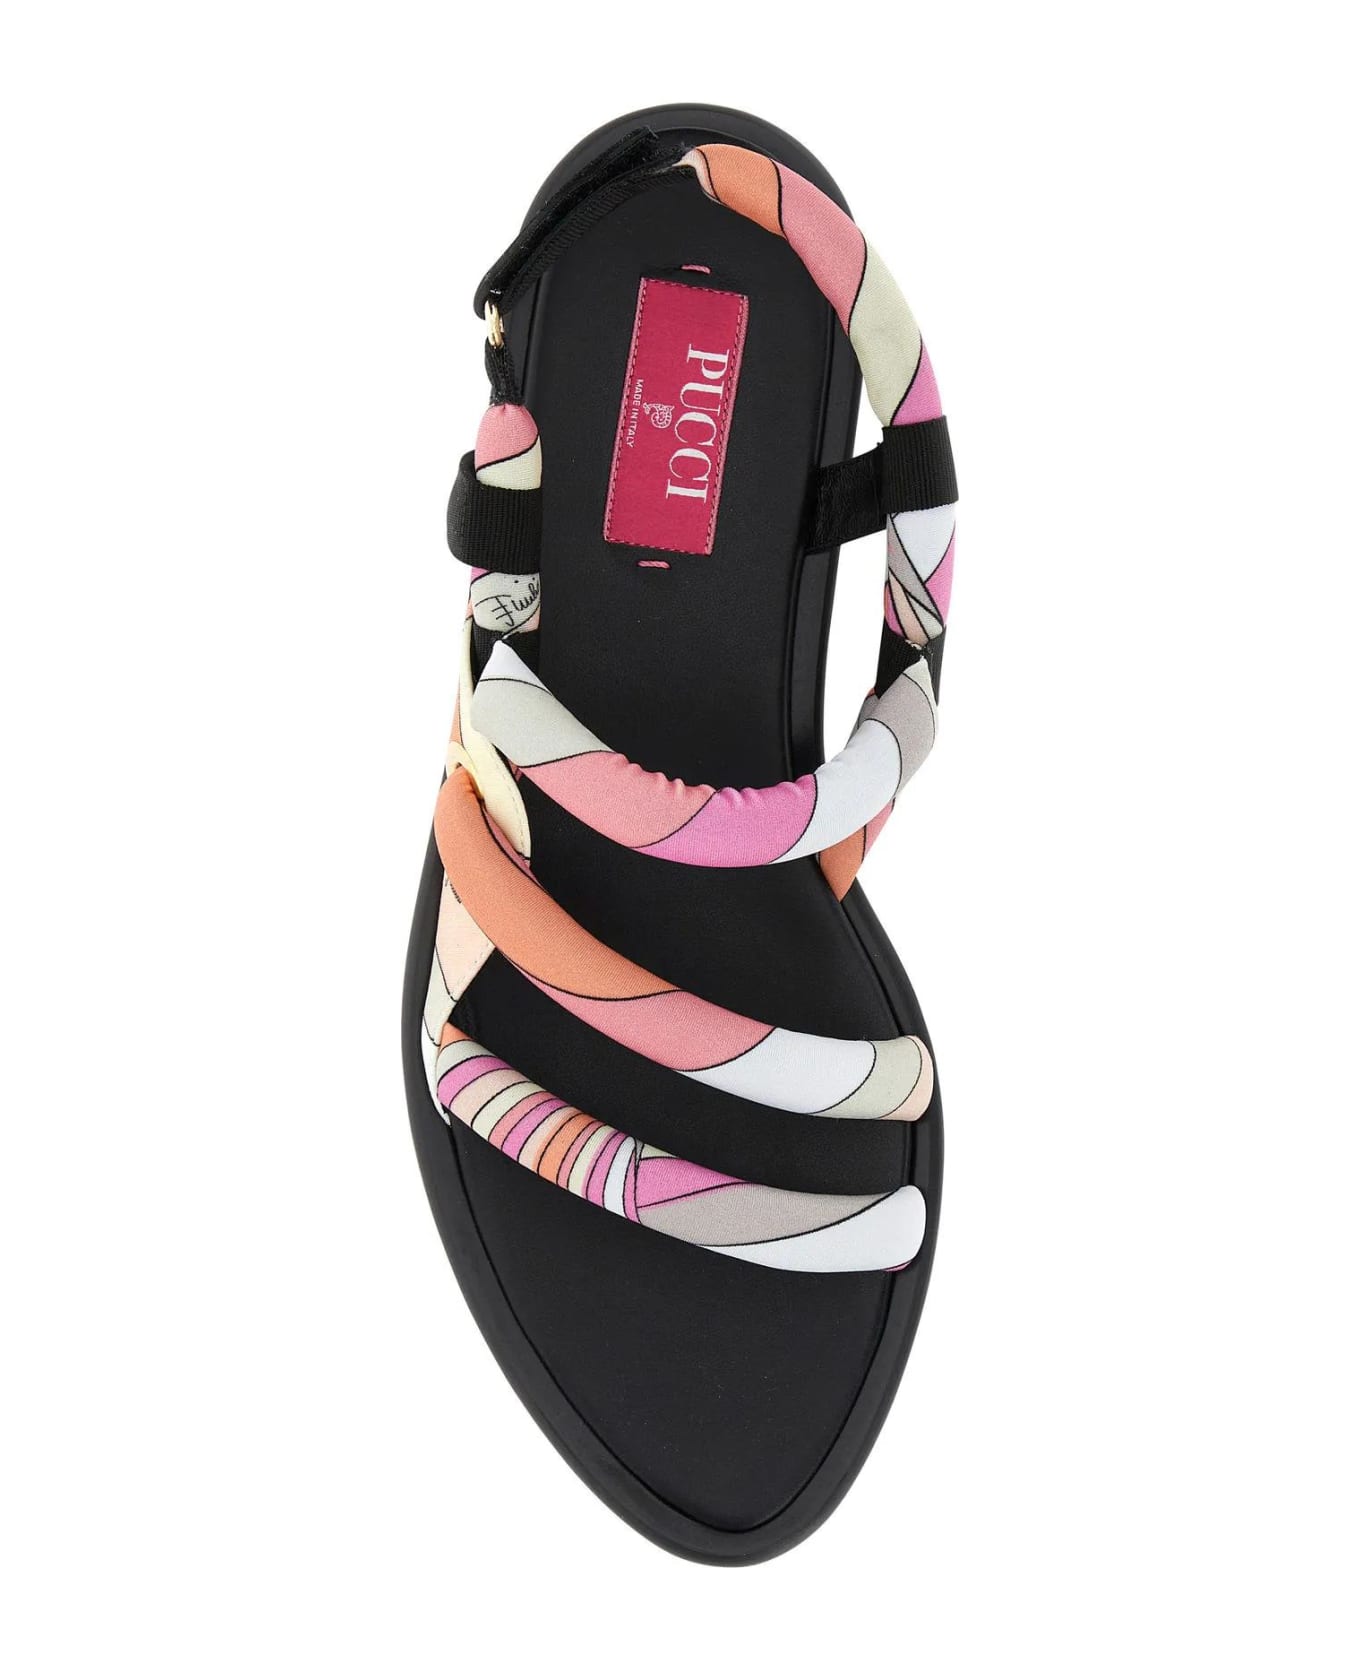 Pucci Printed Fabric Lee Sandals - Pink